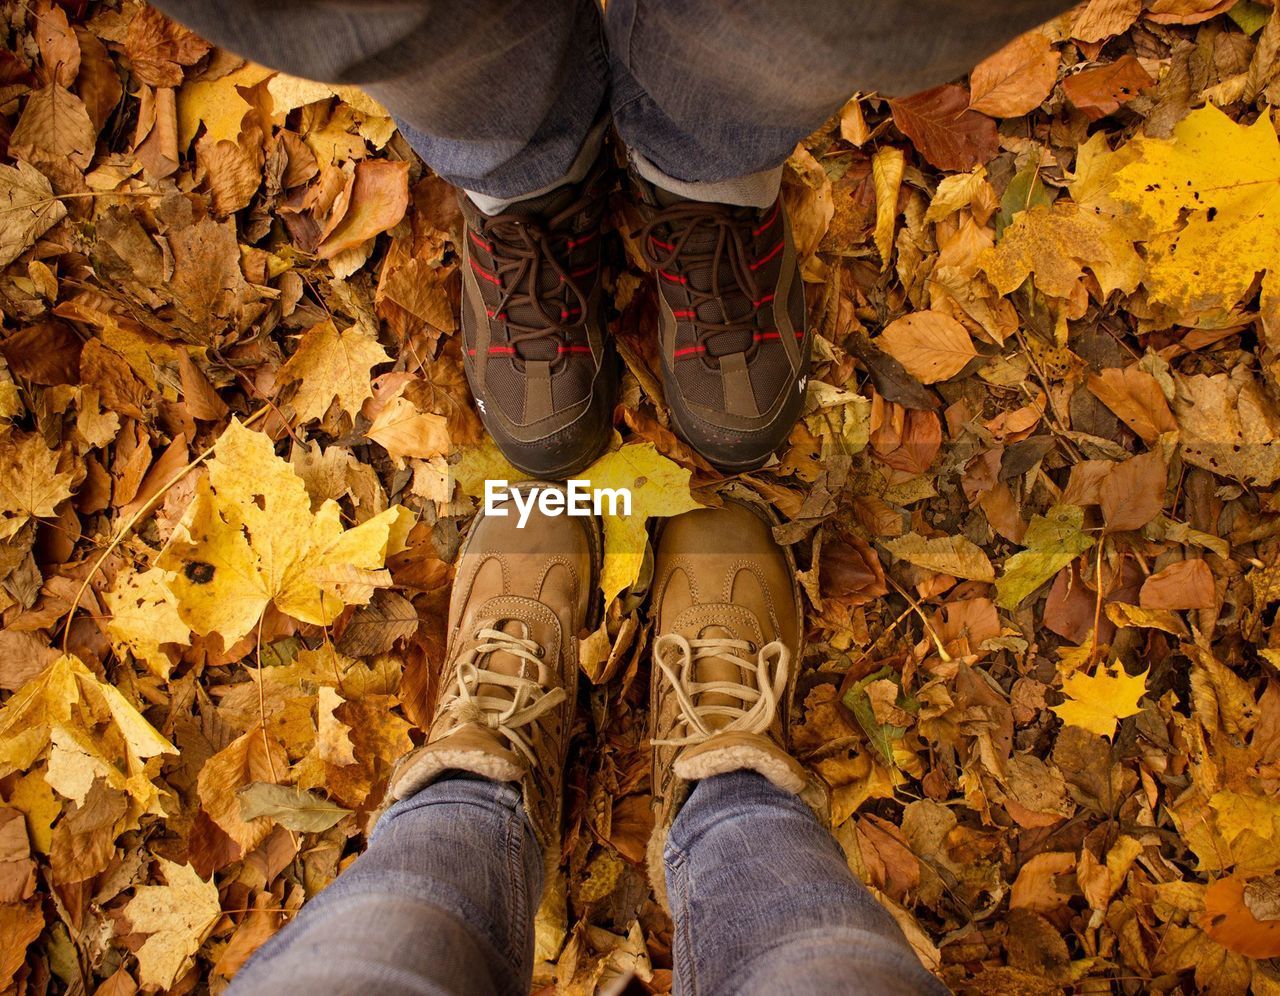 Low section of friends standing on fallen autumn leaves